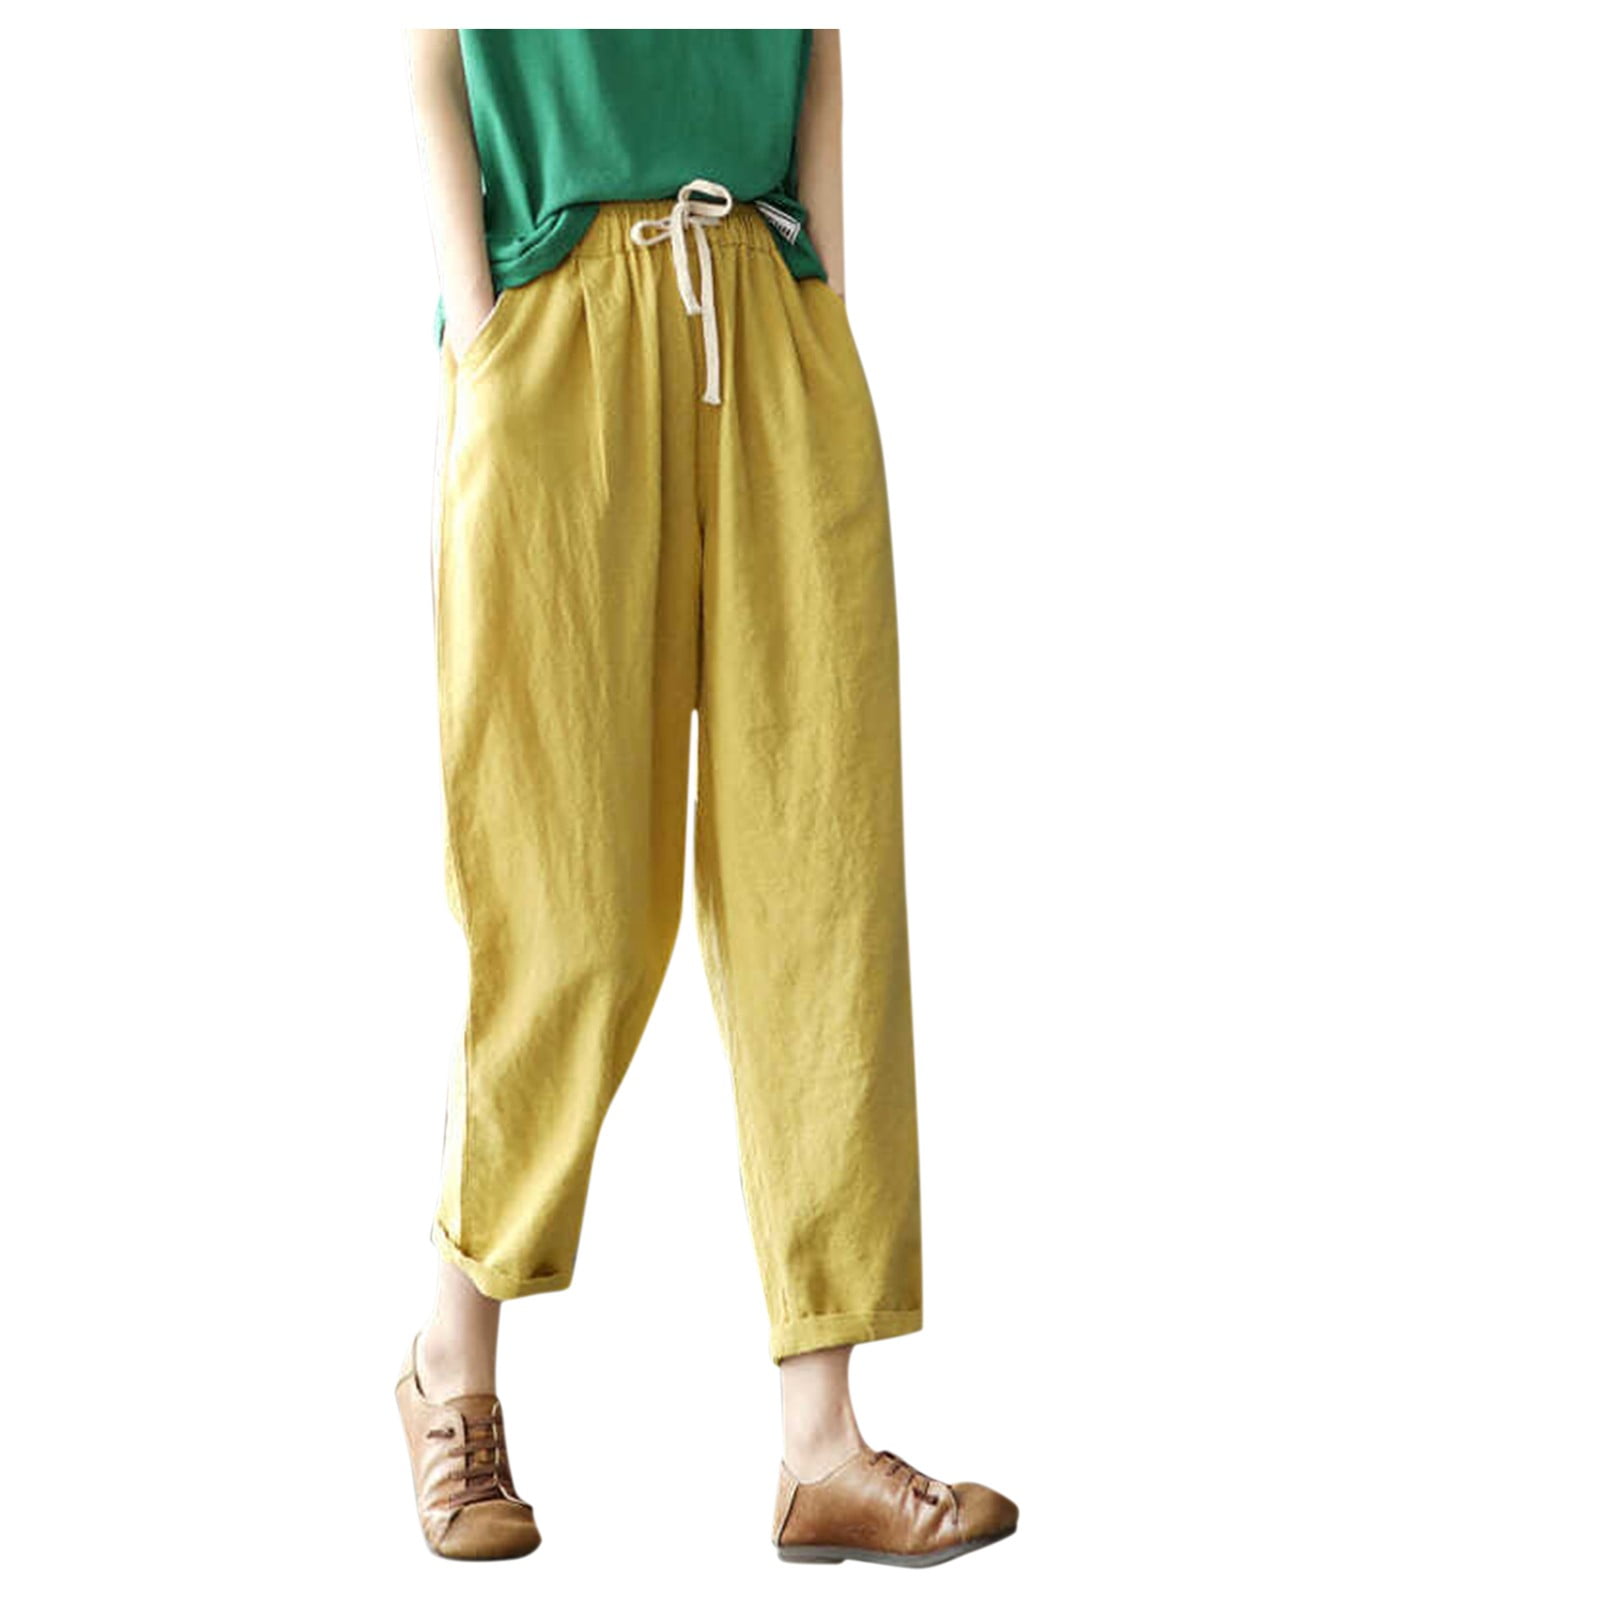 PEASKJP Pants For Women Women's Plus Size Premium Modal Rayon Softest Ever  Palazzo Solid Stretchy Knit Pants Made in USA with Premium Fabric Yellow -  Walmart.com